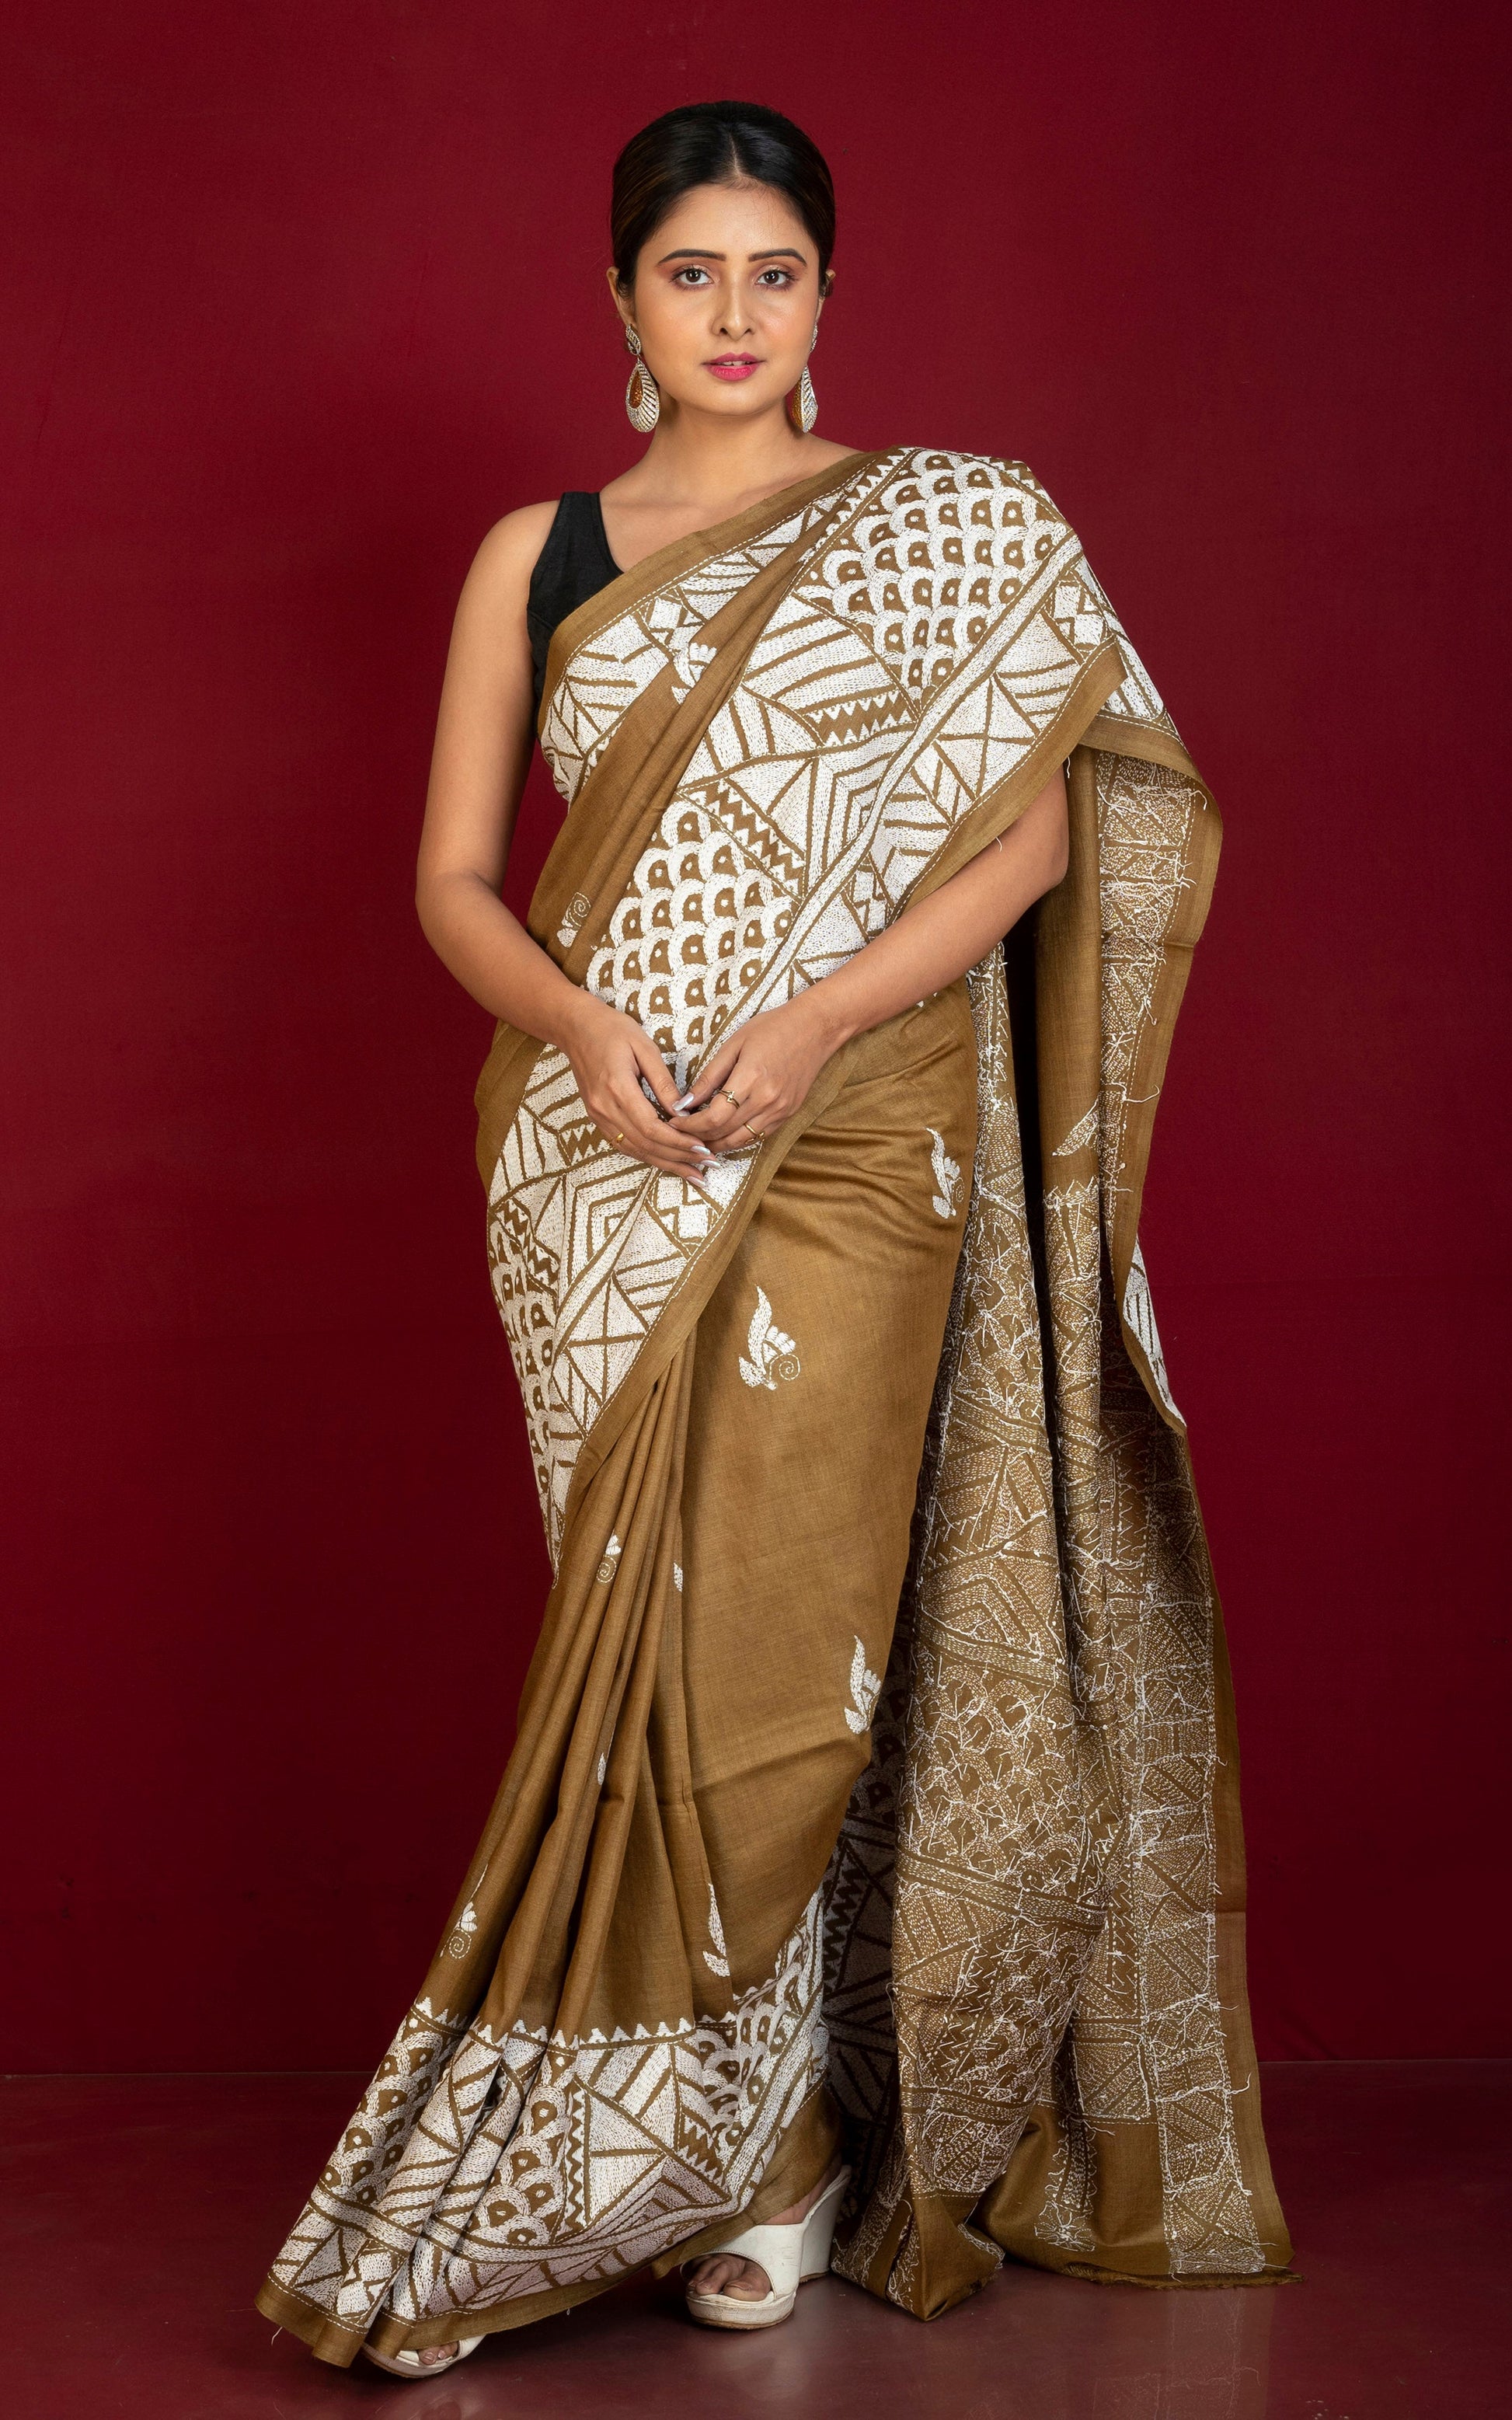 Premium Quality Hand Embroidery Kantha Work on Pure Gachi Tussar Saree in Coffee Brown and Off White